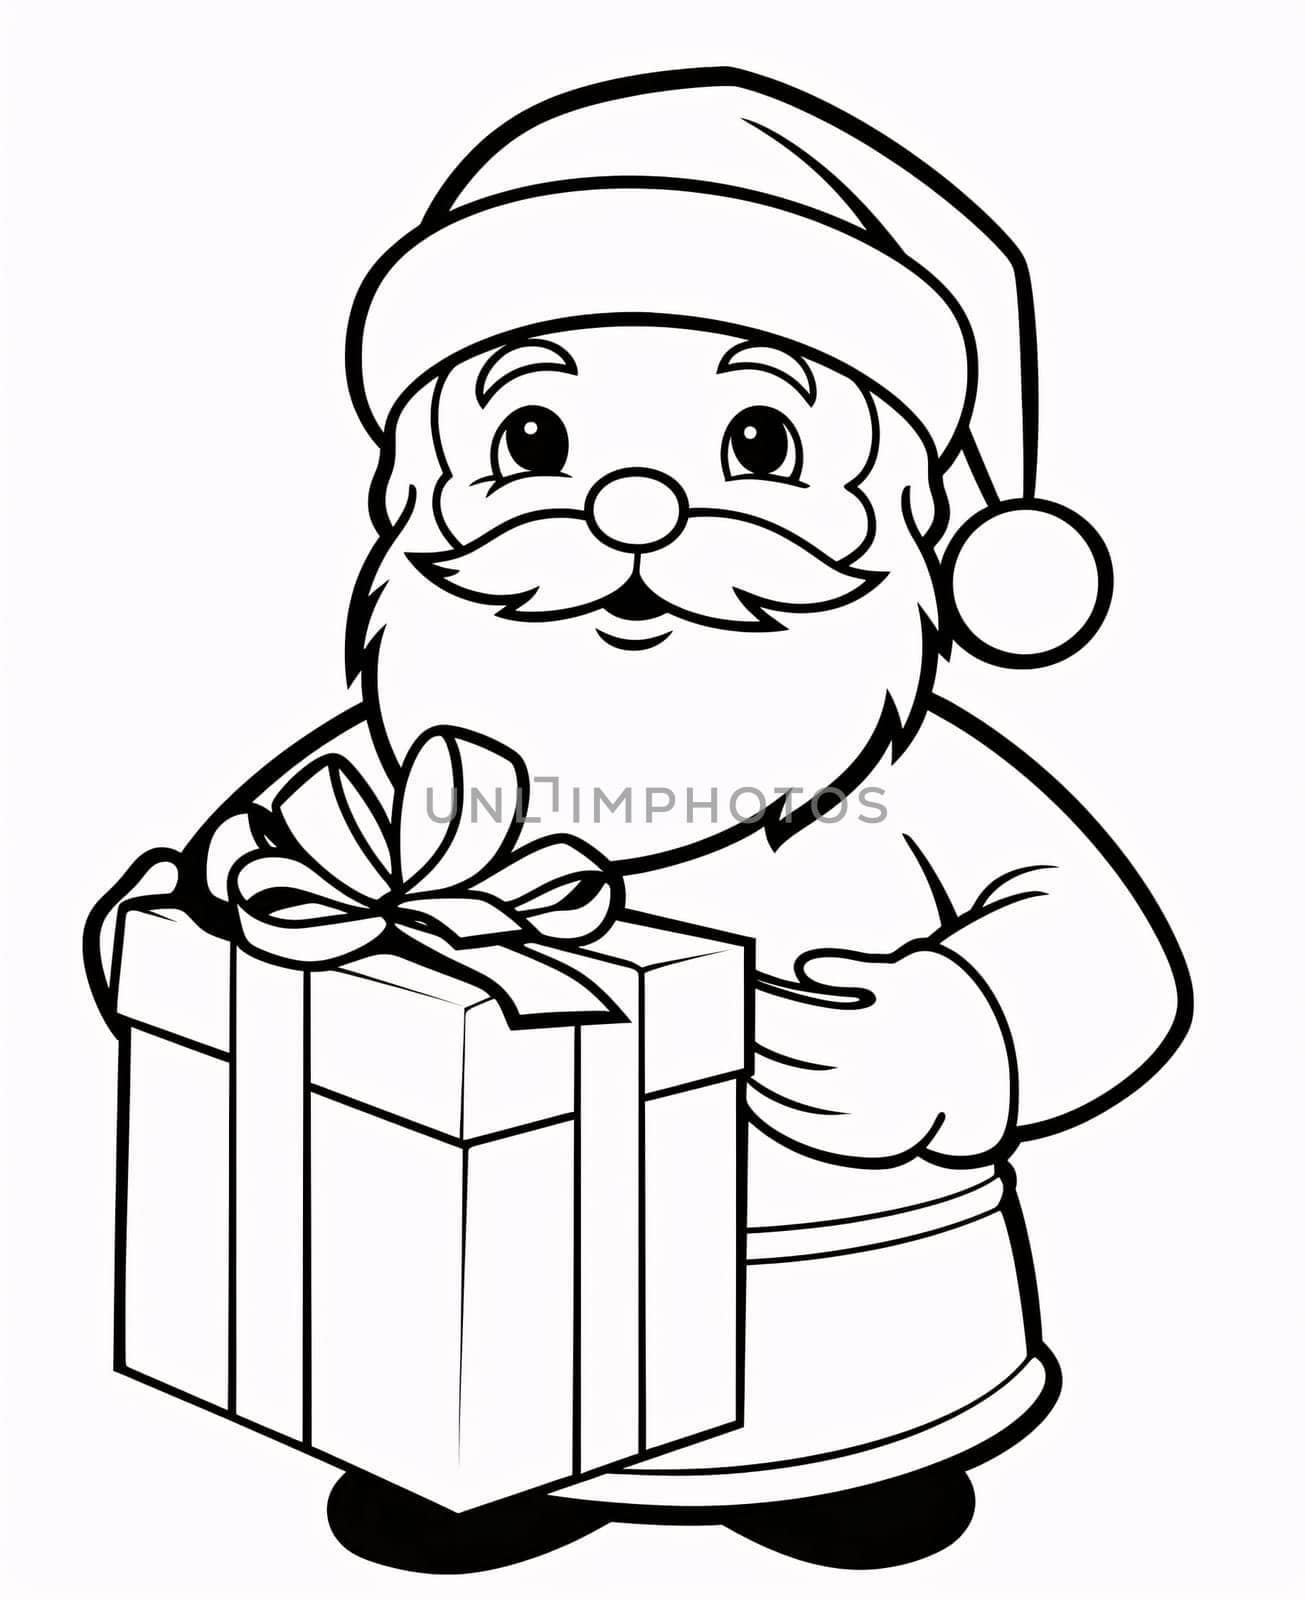 Black and white coloring sheet: Santa Claus with a gift. Gifts as a day symbol of present and love. A time of falling in love and love.